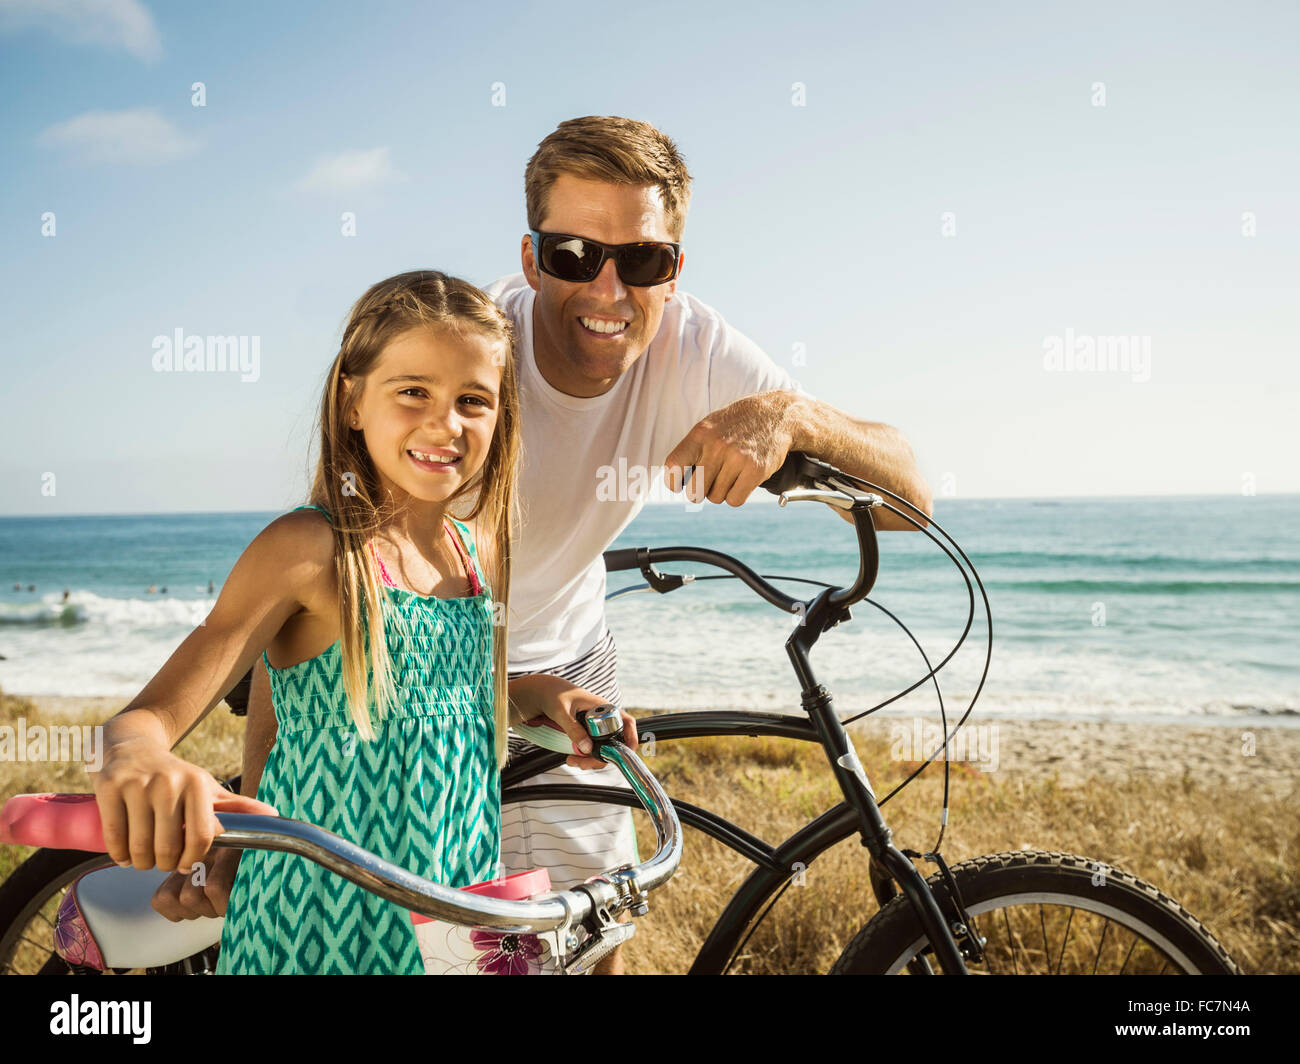 Caucasian father and daughter riding bicycles on beach Banque D'Images